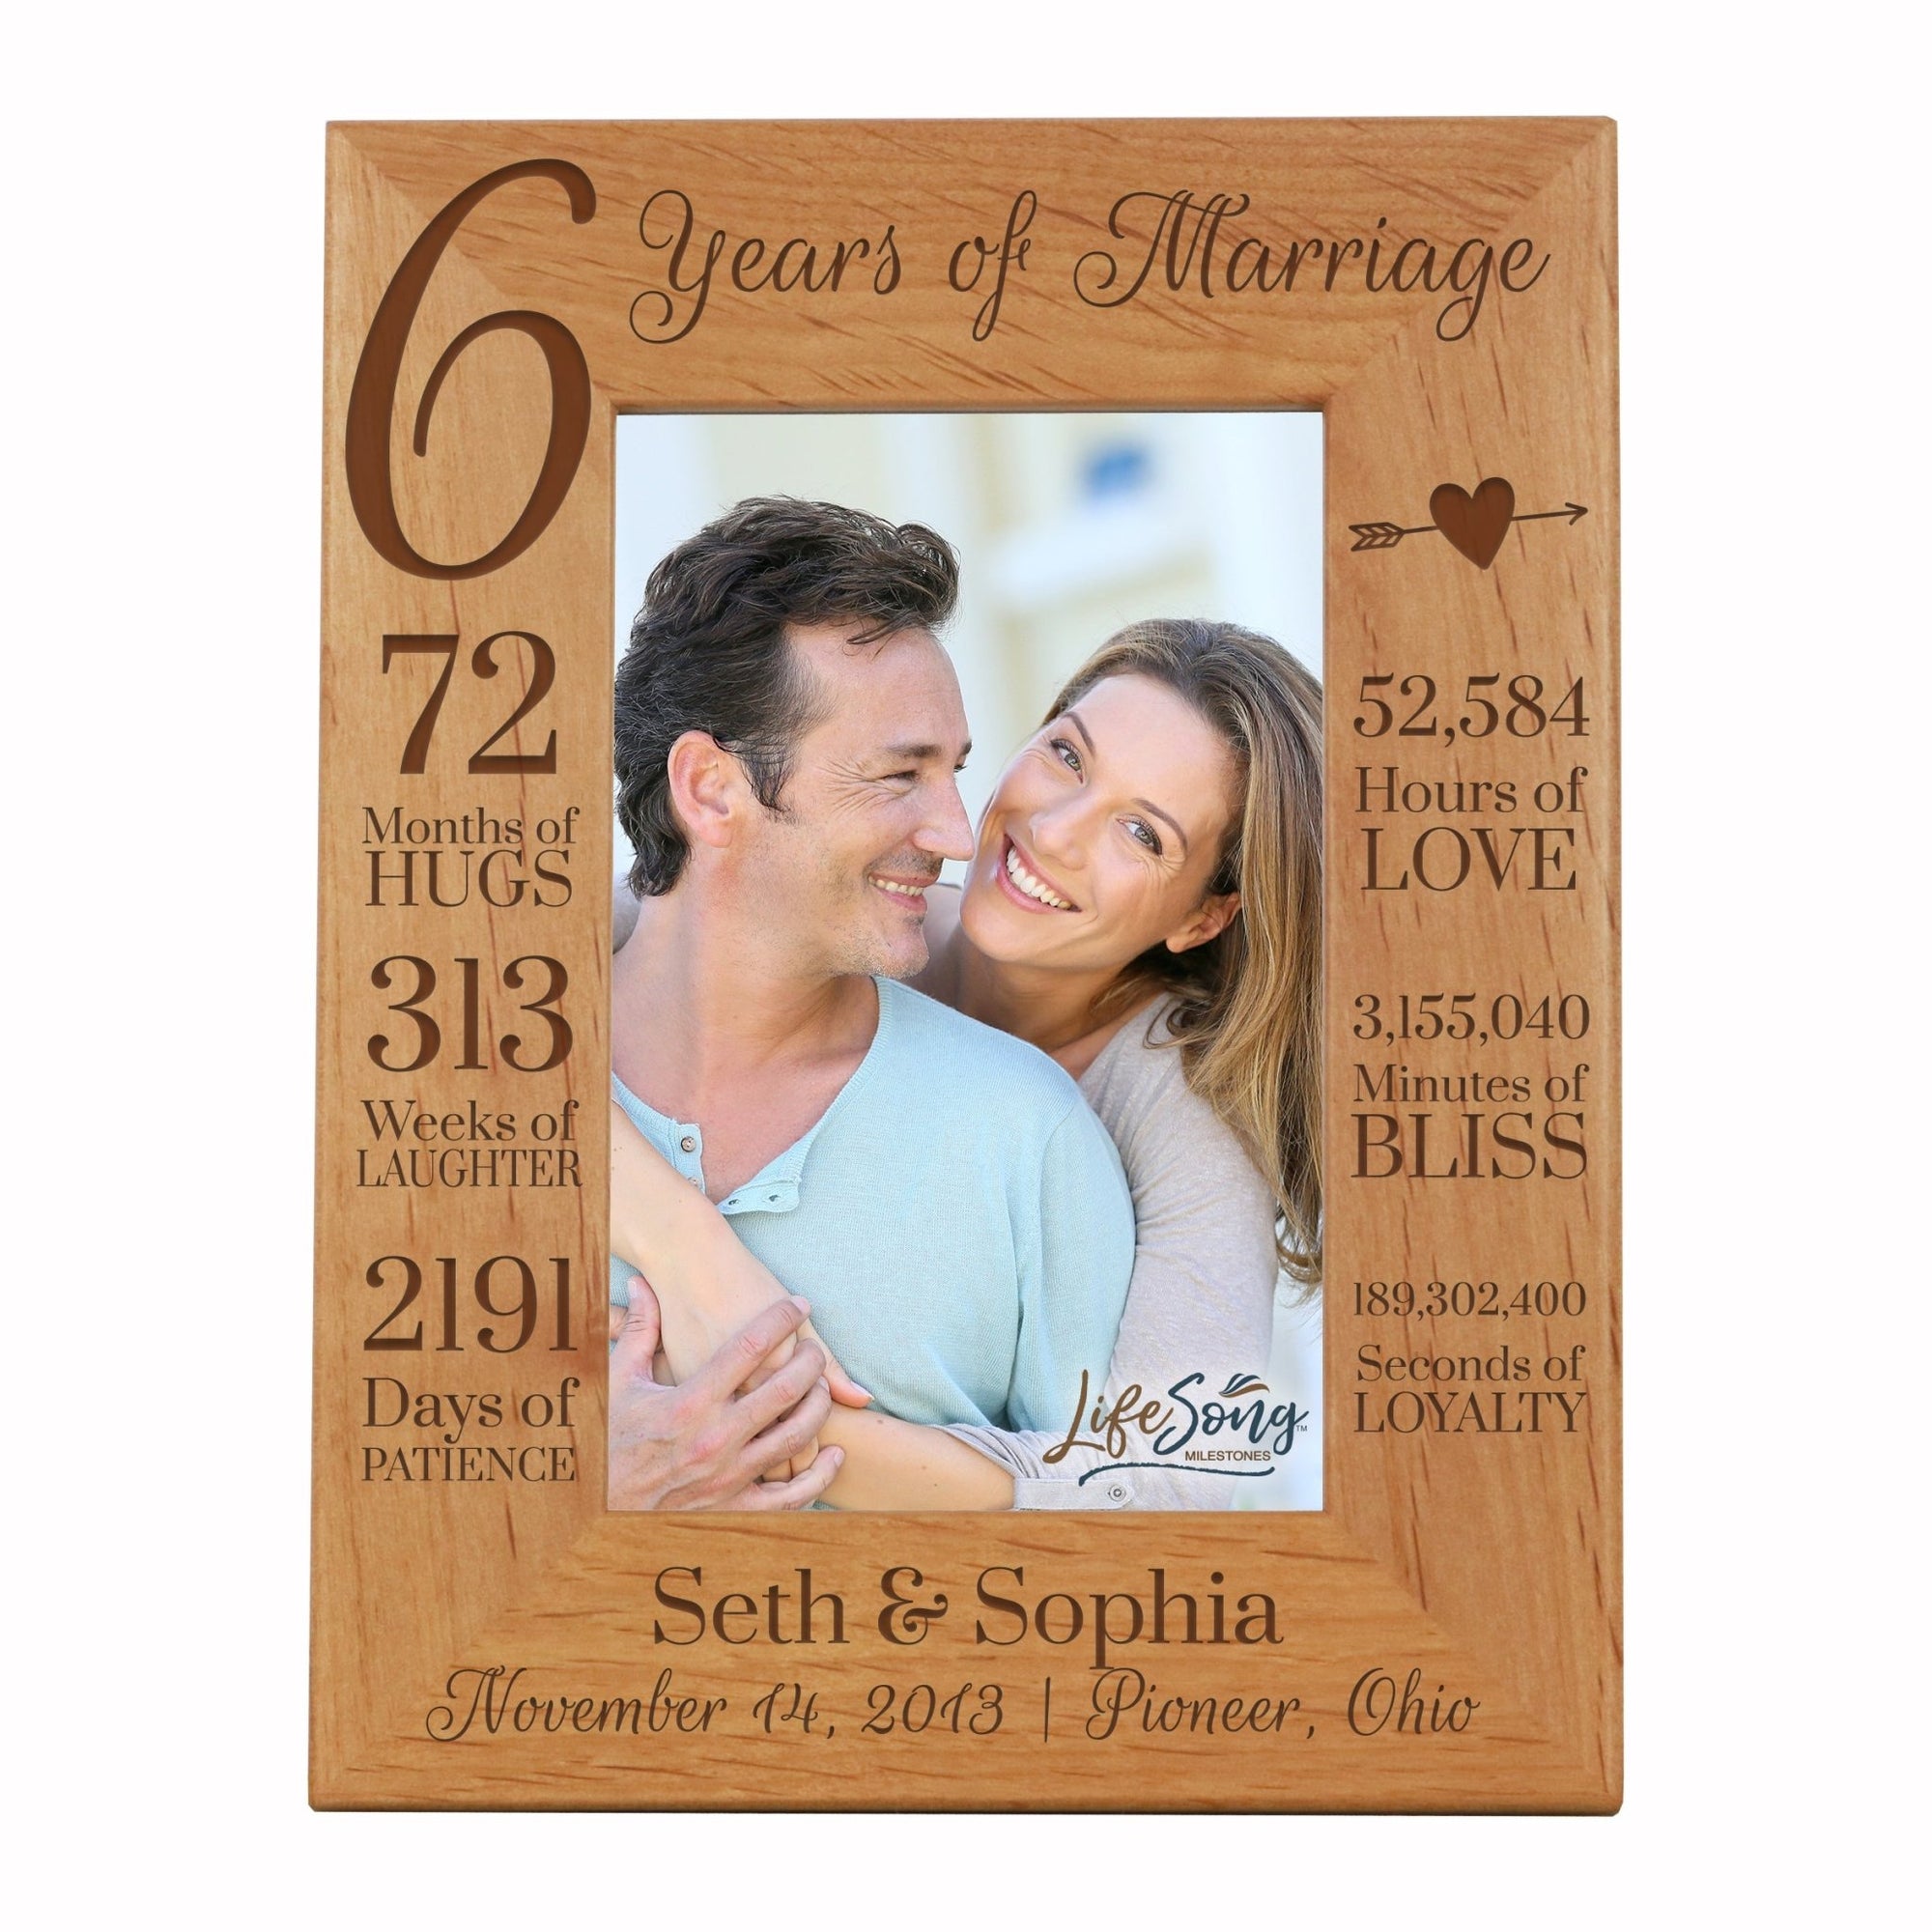 Engraved Personalized 6th Anniversary Photo Frame - 6.5" x 8.5" - LifeSong Milestones